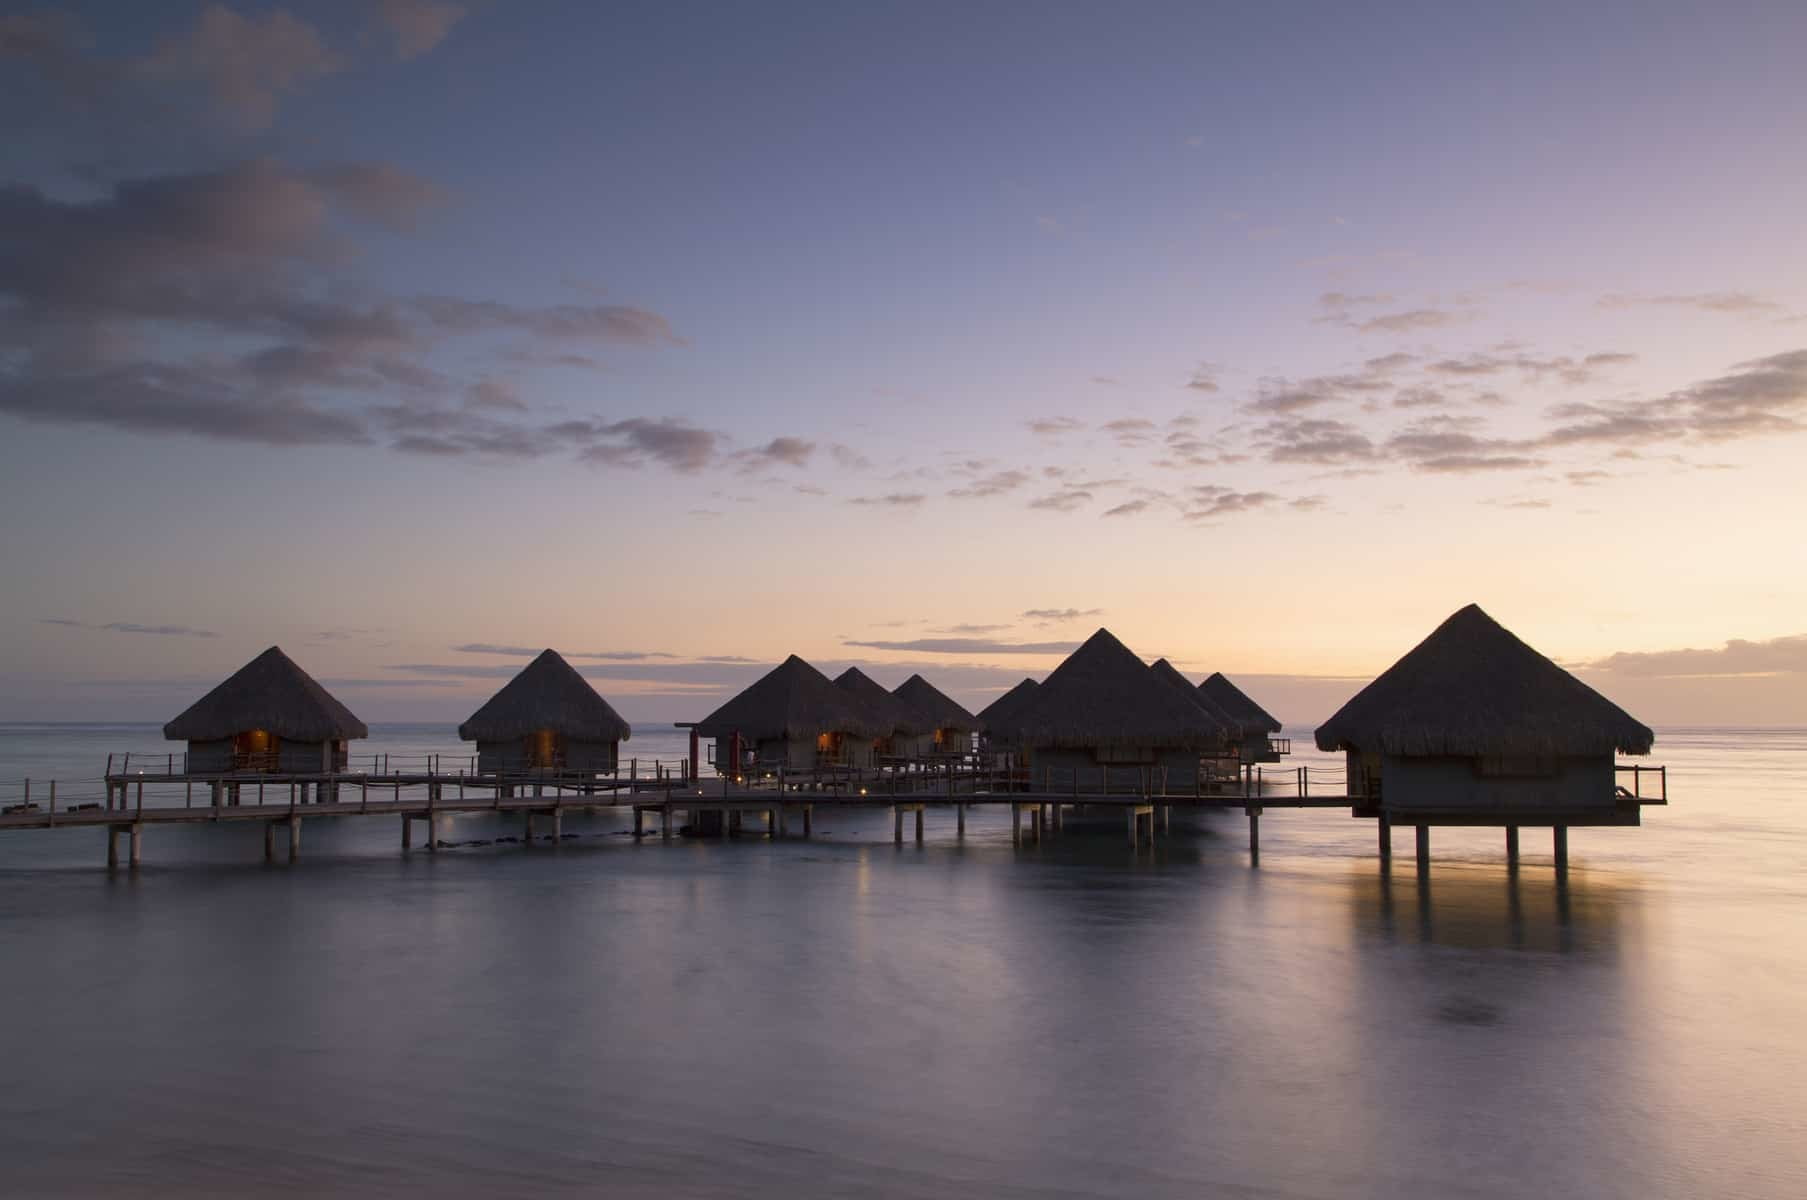 Overwater bungalows at Le Meridien Tahiti Hotel at sunset, Pape'ete, Tahiti, French Polynesia